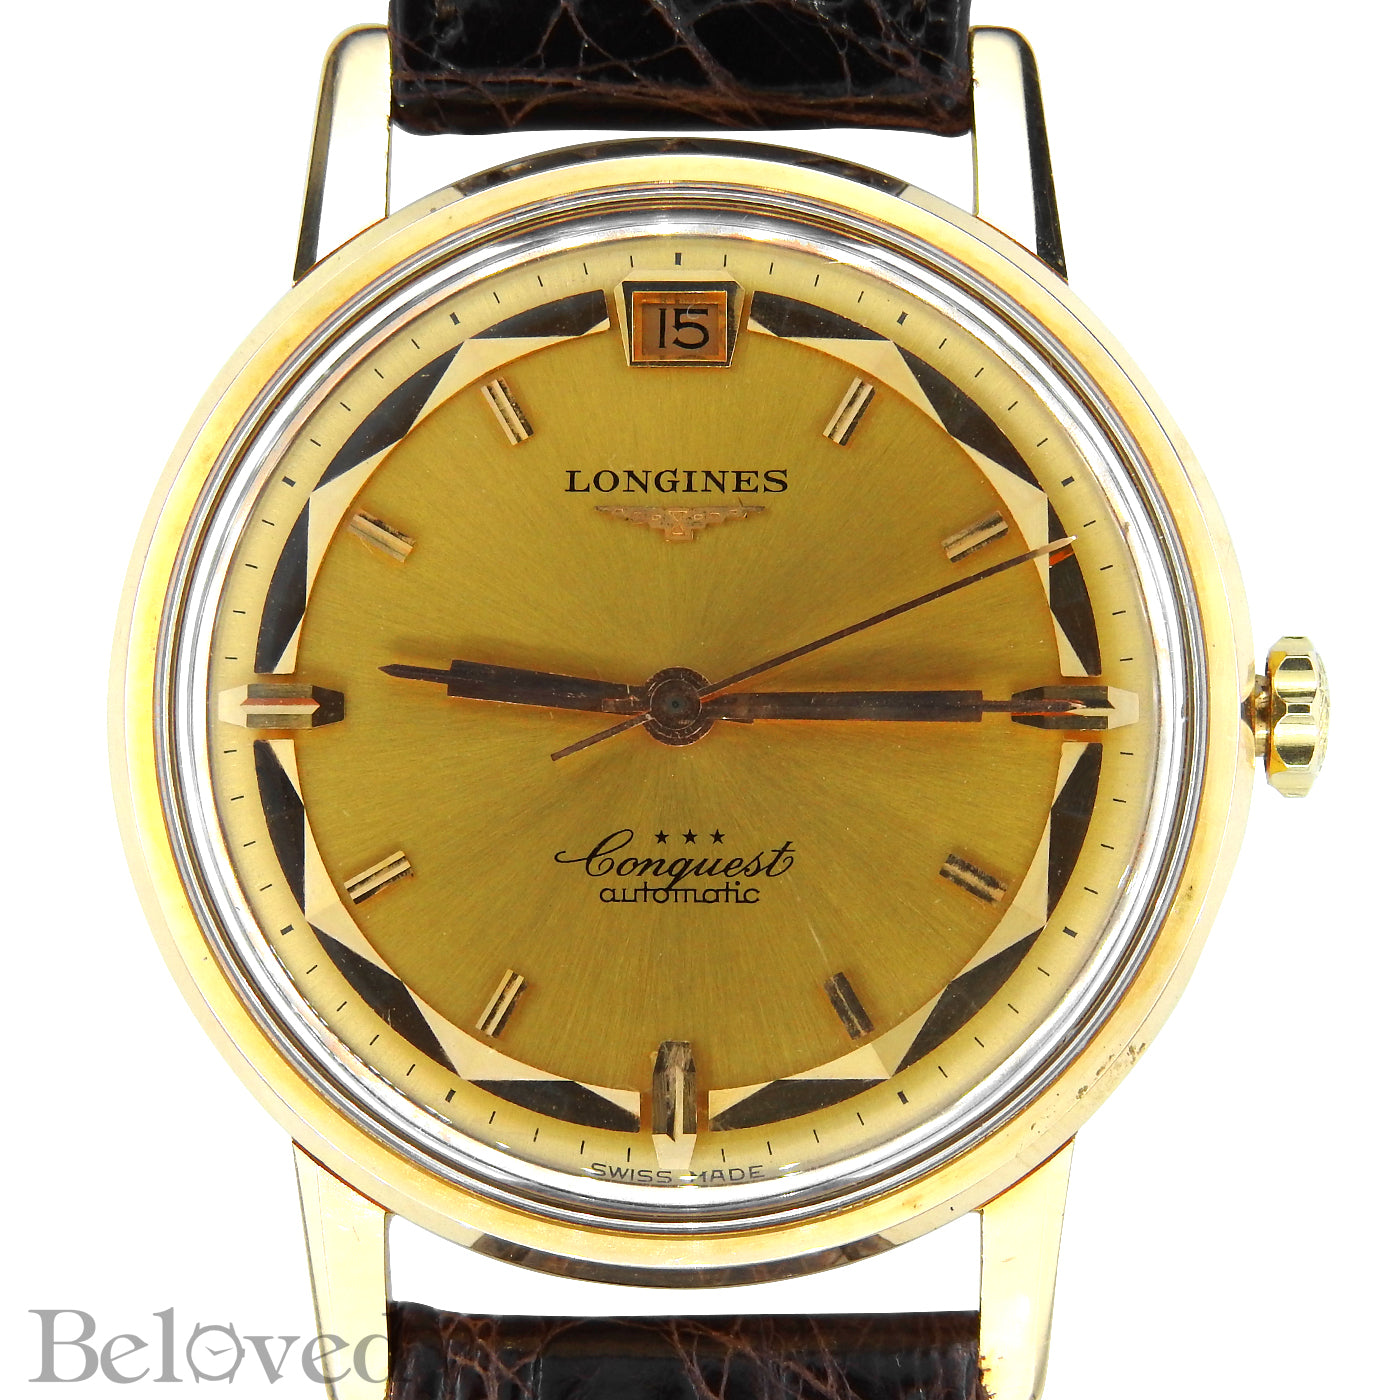 Longines - Conquest  Vintage watches, Longines, Watches